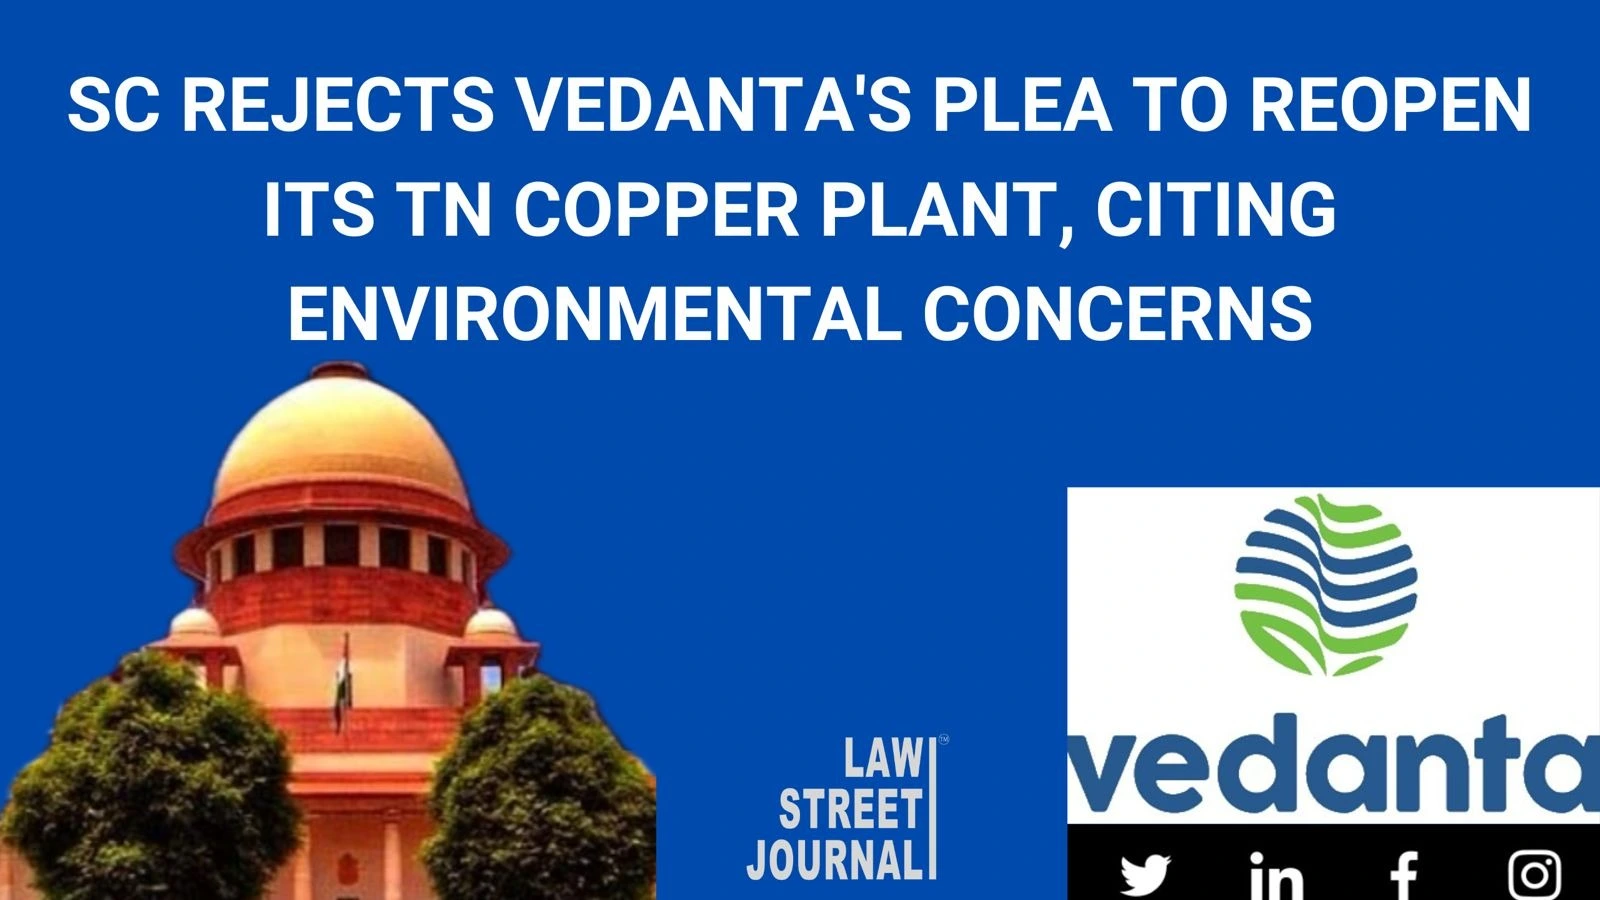 Supreme Court rejects Vedantas plea to reopen its Tamil Nadu copper plant citing environmental concerns